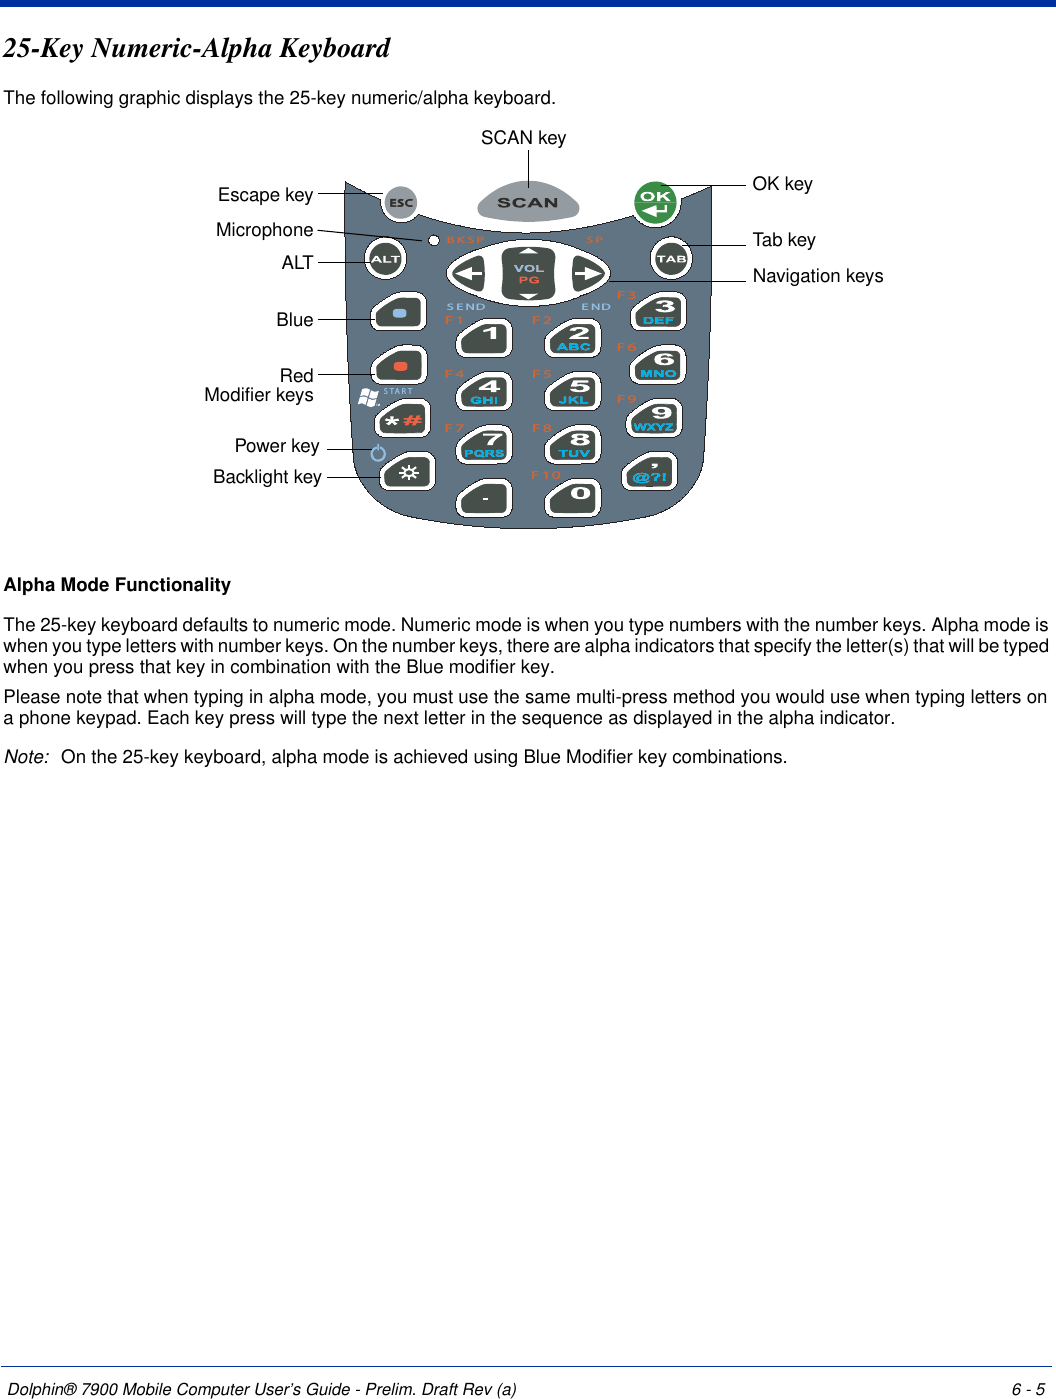 Dolphin® 7900 Mobile Computer User’s Guide - Prelim. Draft Rev (a) 6 - 525-Key Numeric-Alpha KeyboardThe following graphic displays the 25-key numeric/alpha keyboard.Alpha Mode FunctionalityThe 25-key keyboard defaults to numeric mode. Numeric mode is when you type numbers with the number keys. Alpha mode is when you type letters with number keys. On the number keys, there are alpha indicators that specify the letter(s) that will be typed when you press that key in combination with the Blue modifier key.Please note that when typing in alpha mode, you must use the same multi-press method you would use when typing letters on a phone keypad. Each key press will type the next letter in the sequence as displayed in the alpha indicator.Note: On the 25-key keyboard, alpha mode is achieved using Blue Modifier key combinations.F1F2F3F4 F5F6F7 F8F9F10STARTBKSP SPSEND ENDESCOK keyNavigation keysTab keyALTBlueRed Modifier keysSCAN keyEscape keyPower keyMicrophone Backlight key